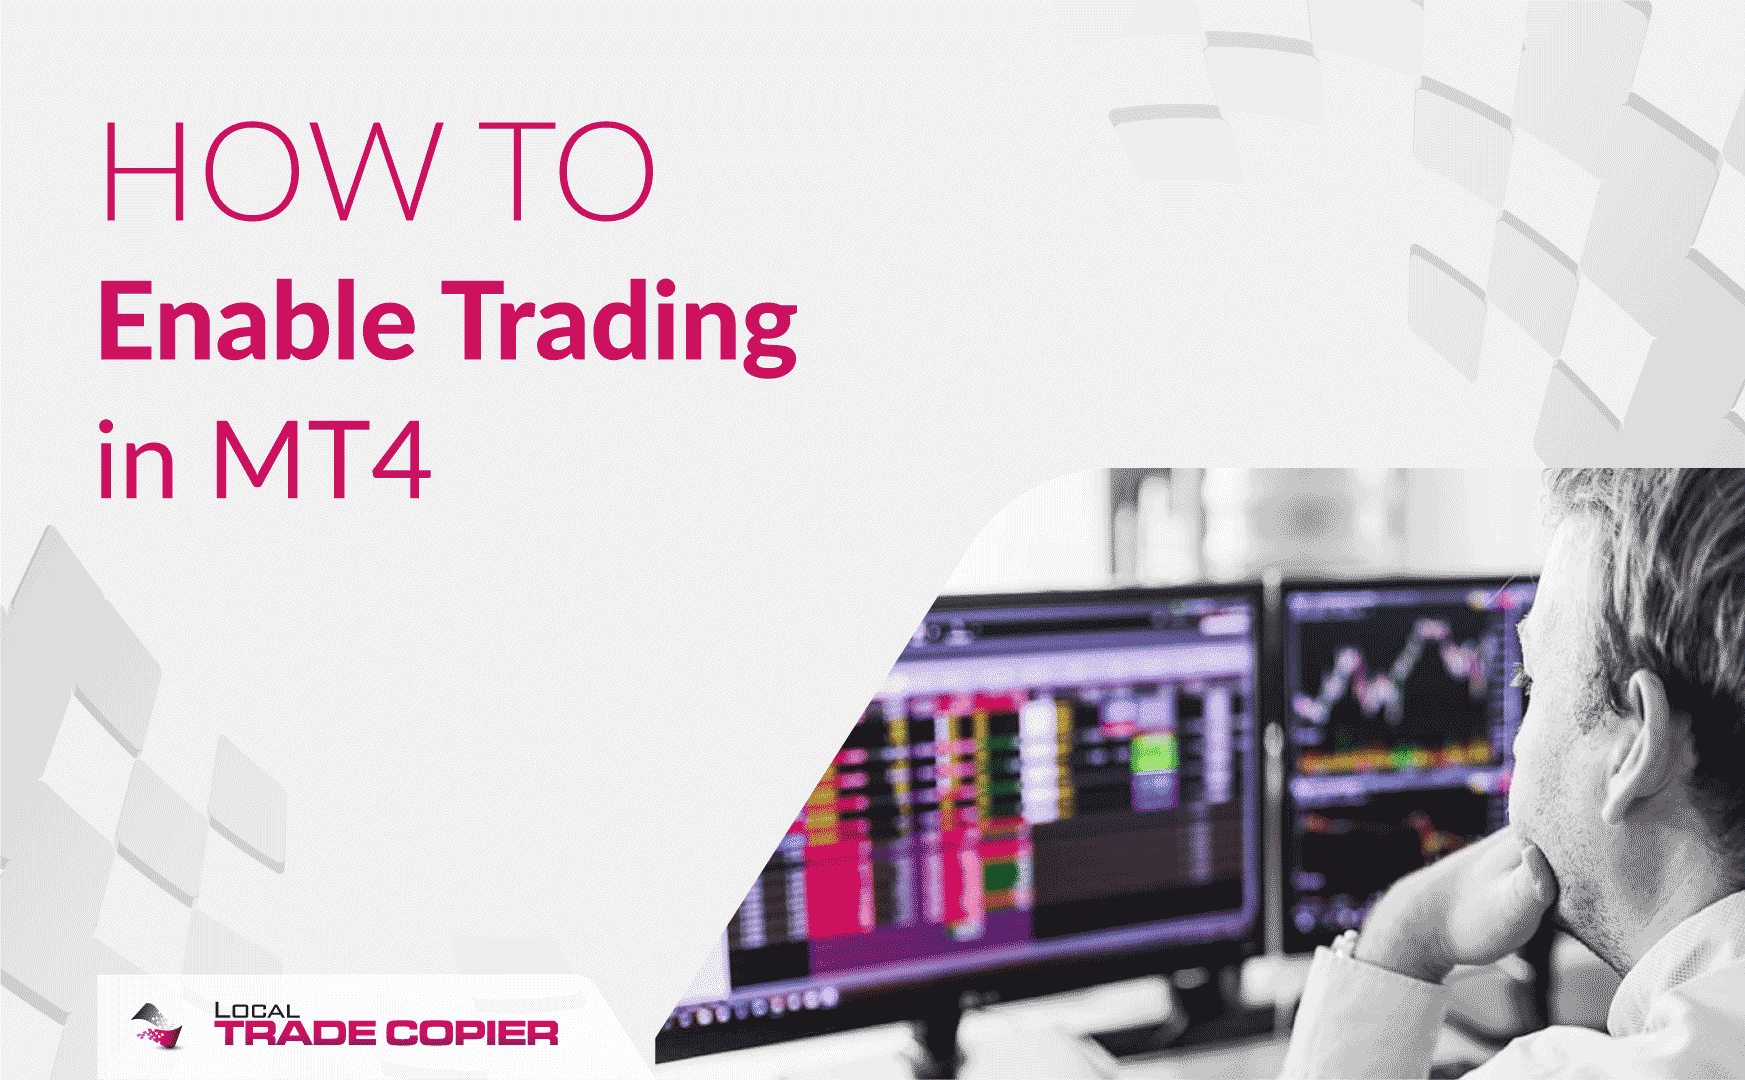 Local-Trade-Copier-Tutorials-How-To-Enable-Trading-in-MT4-1745x1080